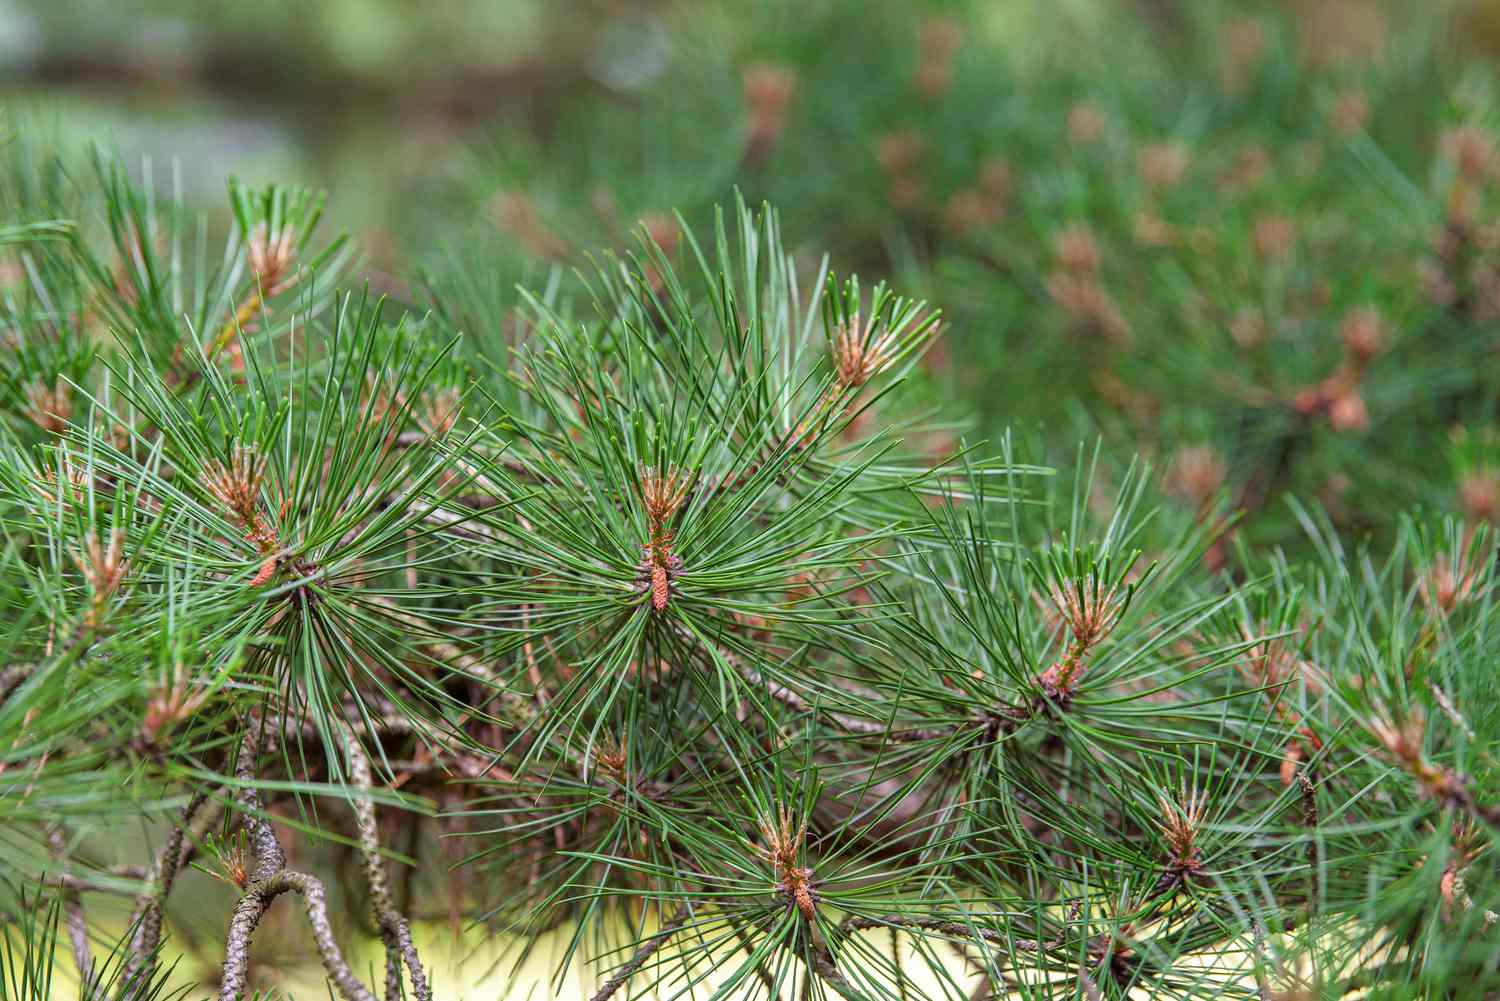 Pitch pine tree branches with long dark green needles closeup